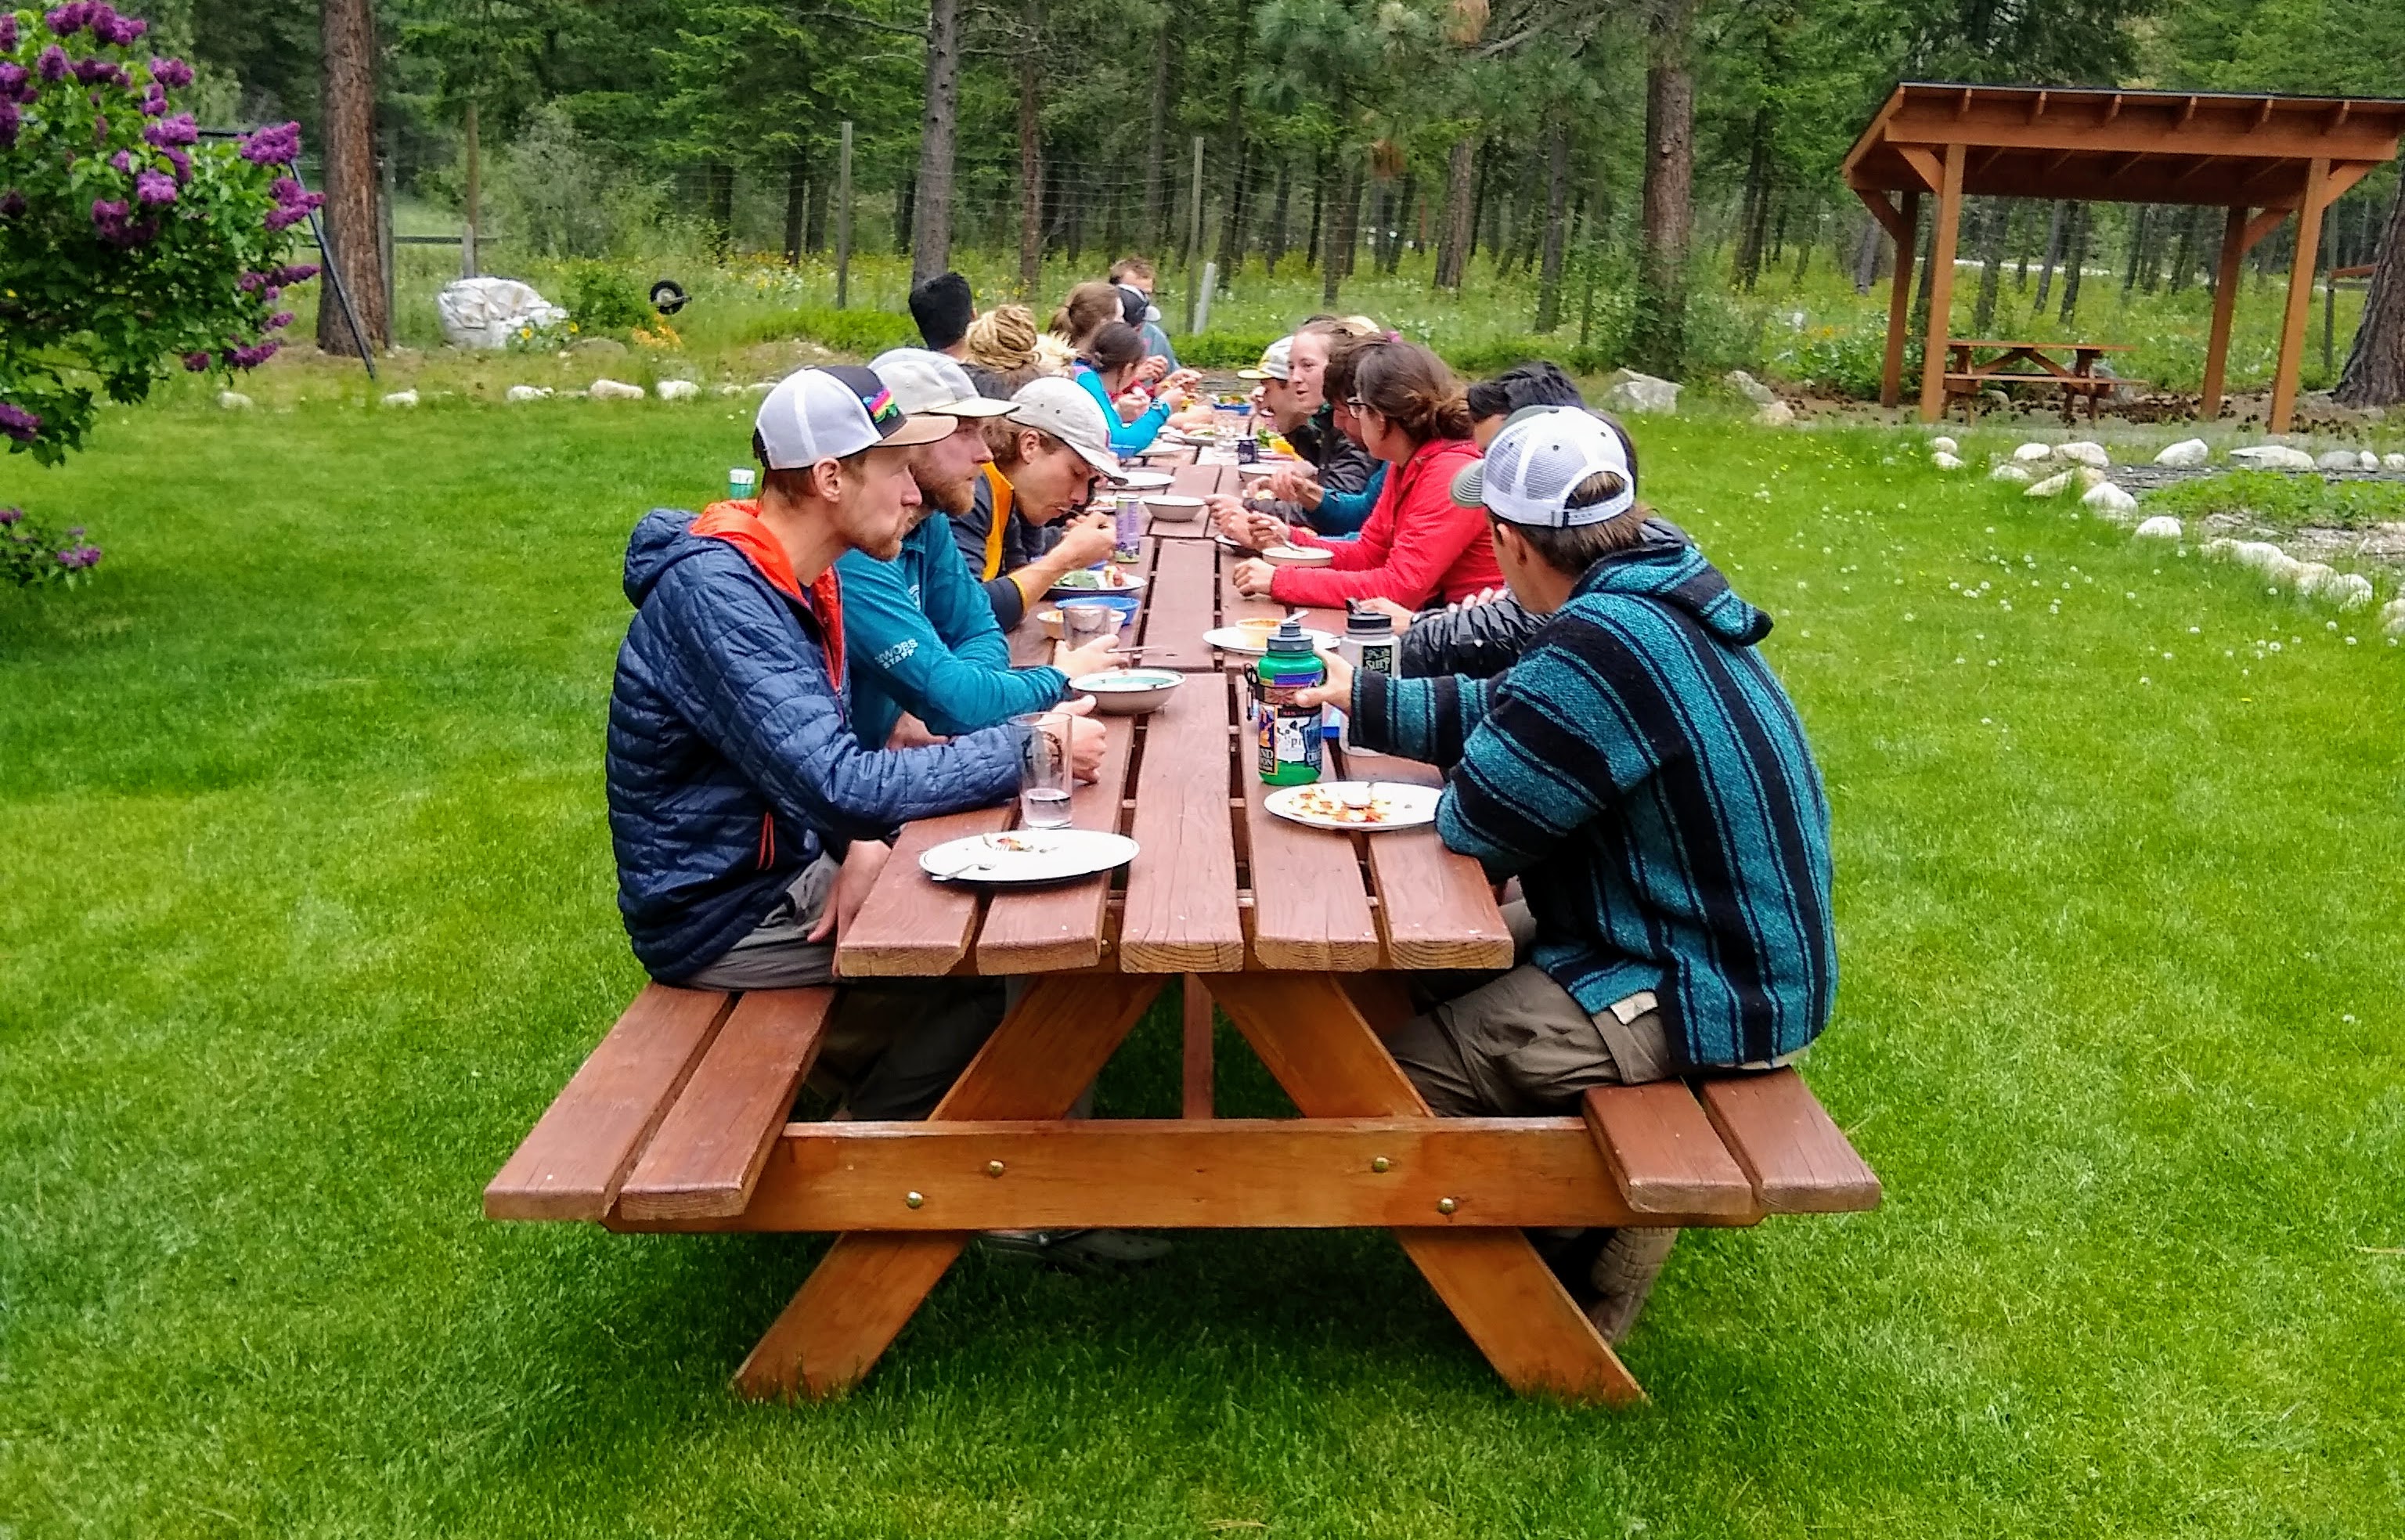 Outward Bound students eating at picnic table